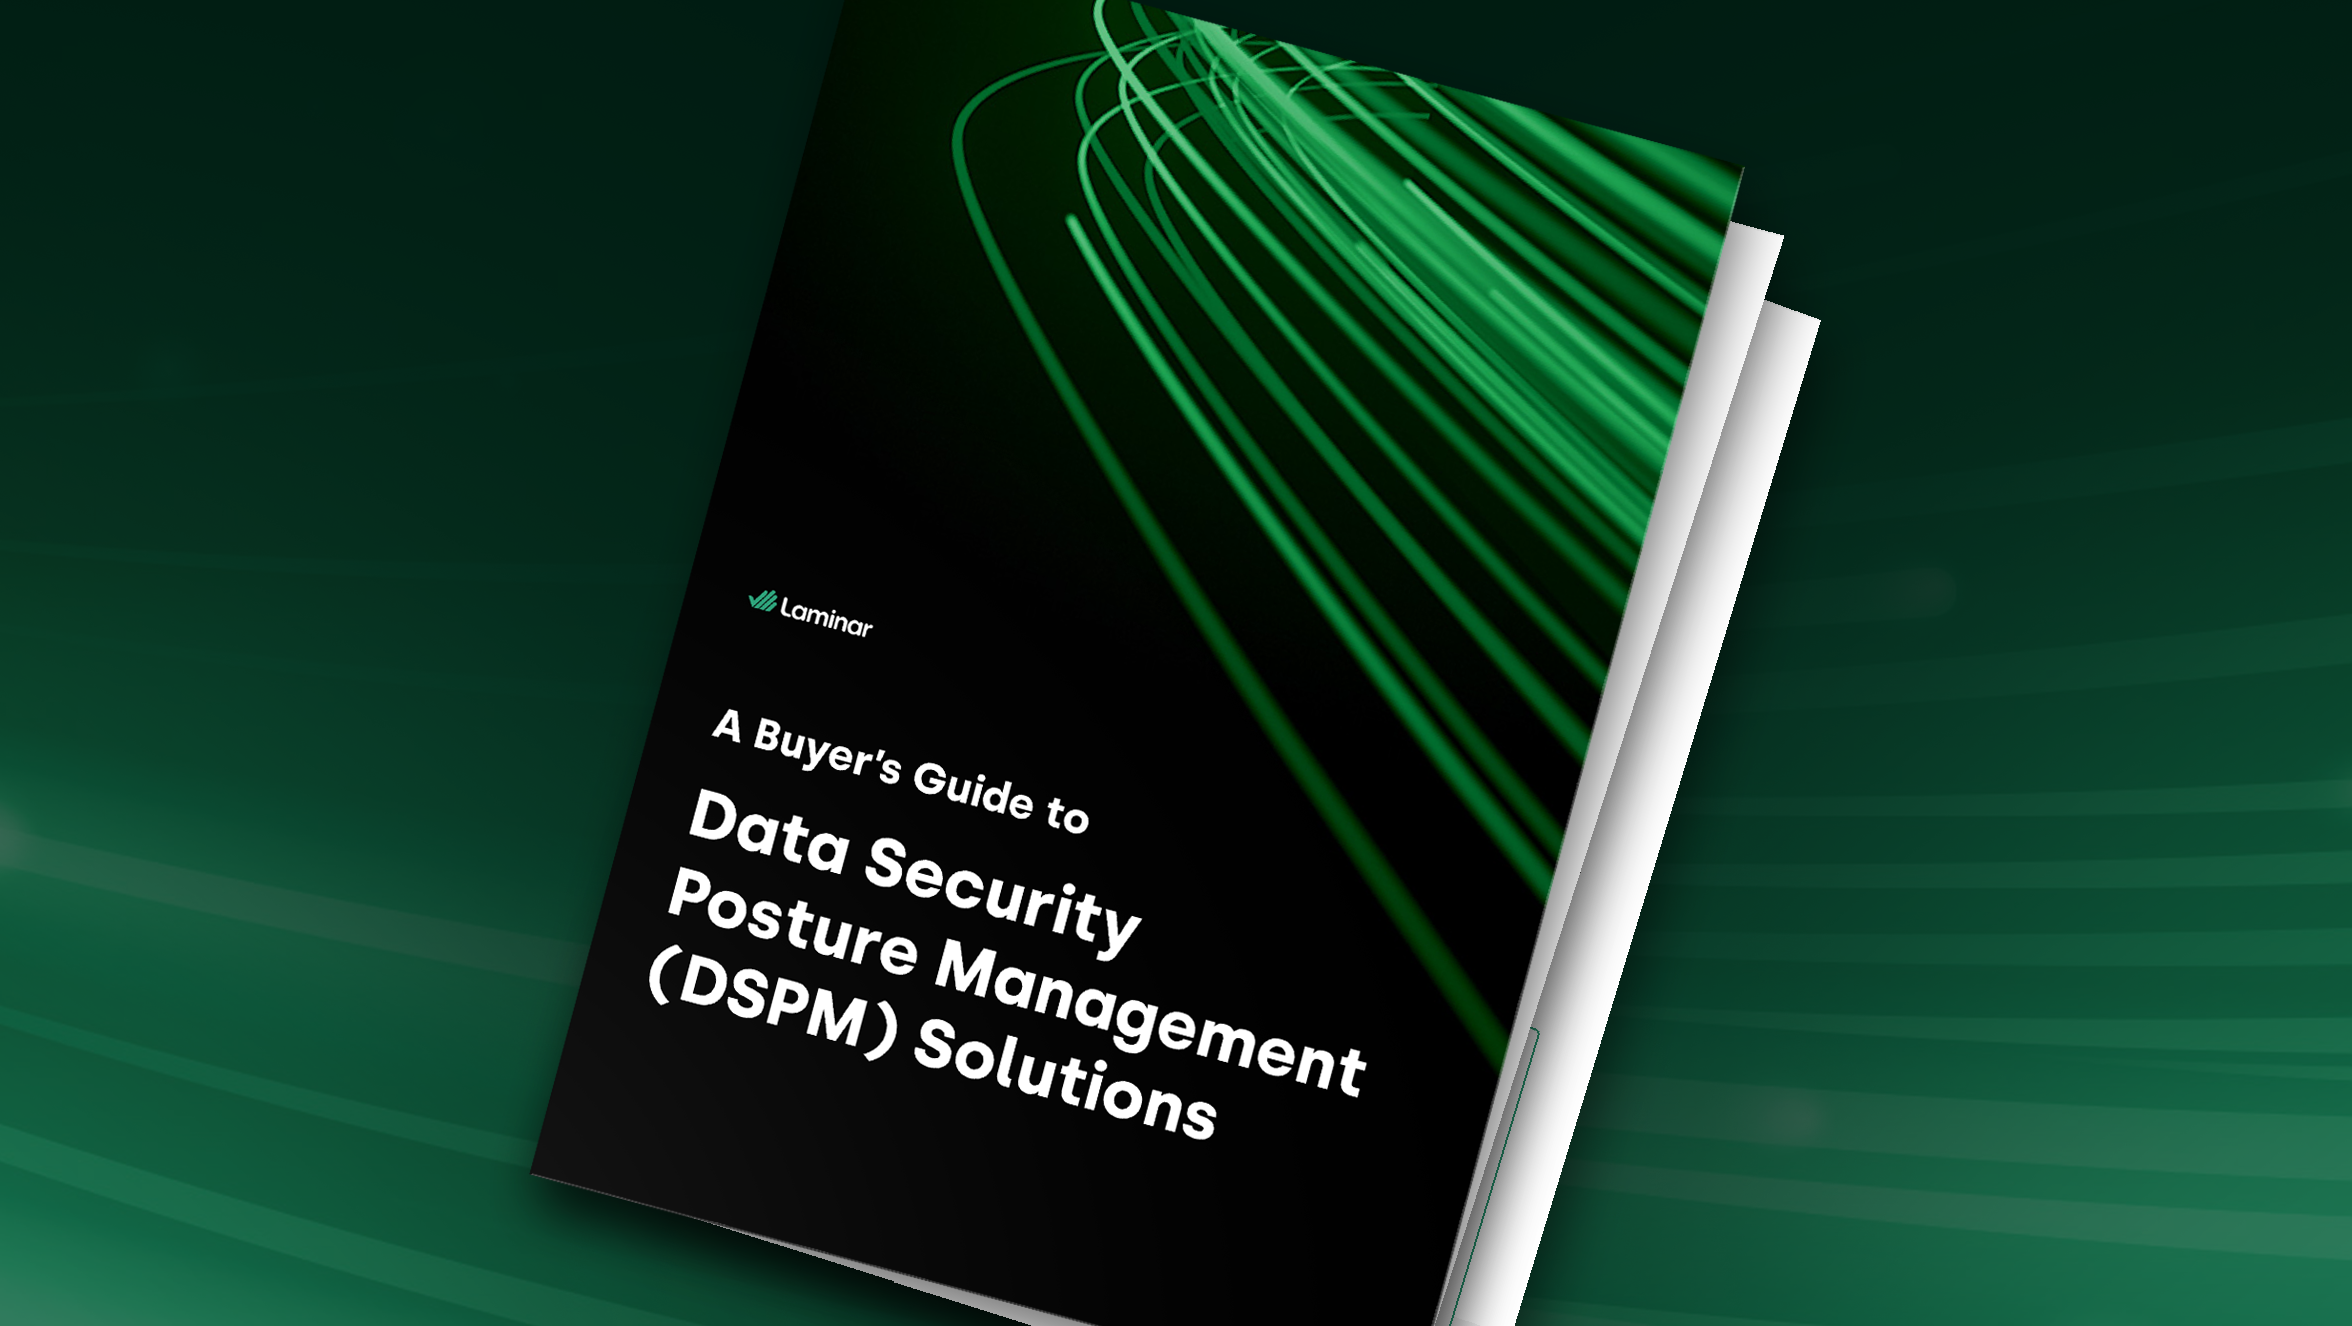 A Buyer’s Guide to DSPM Solutions